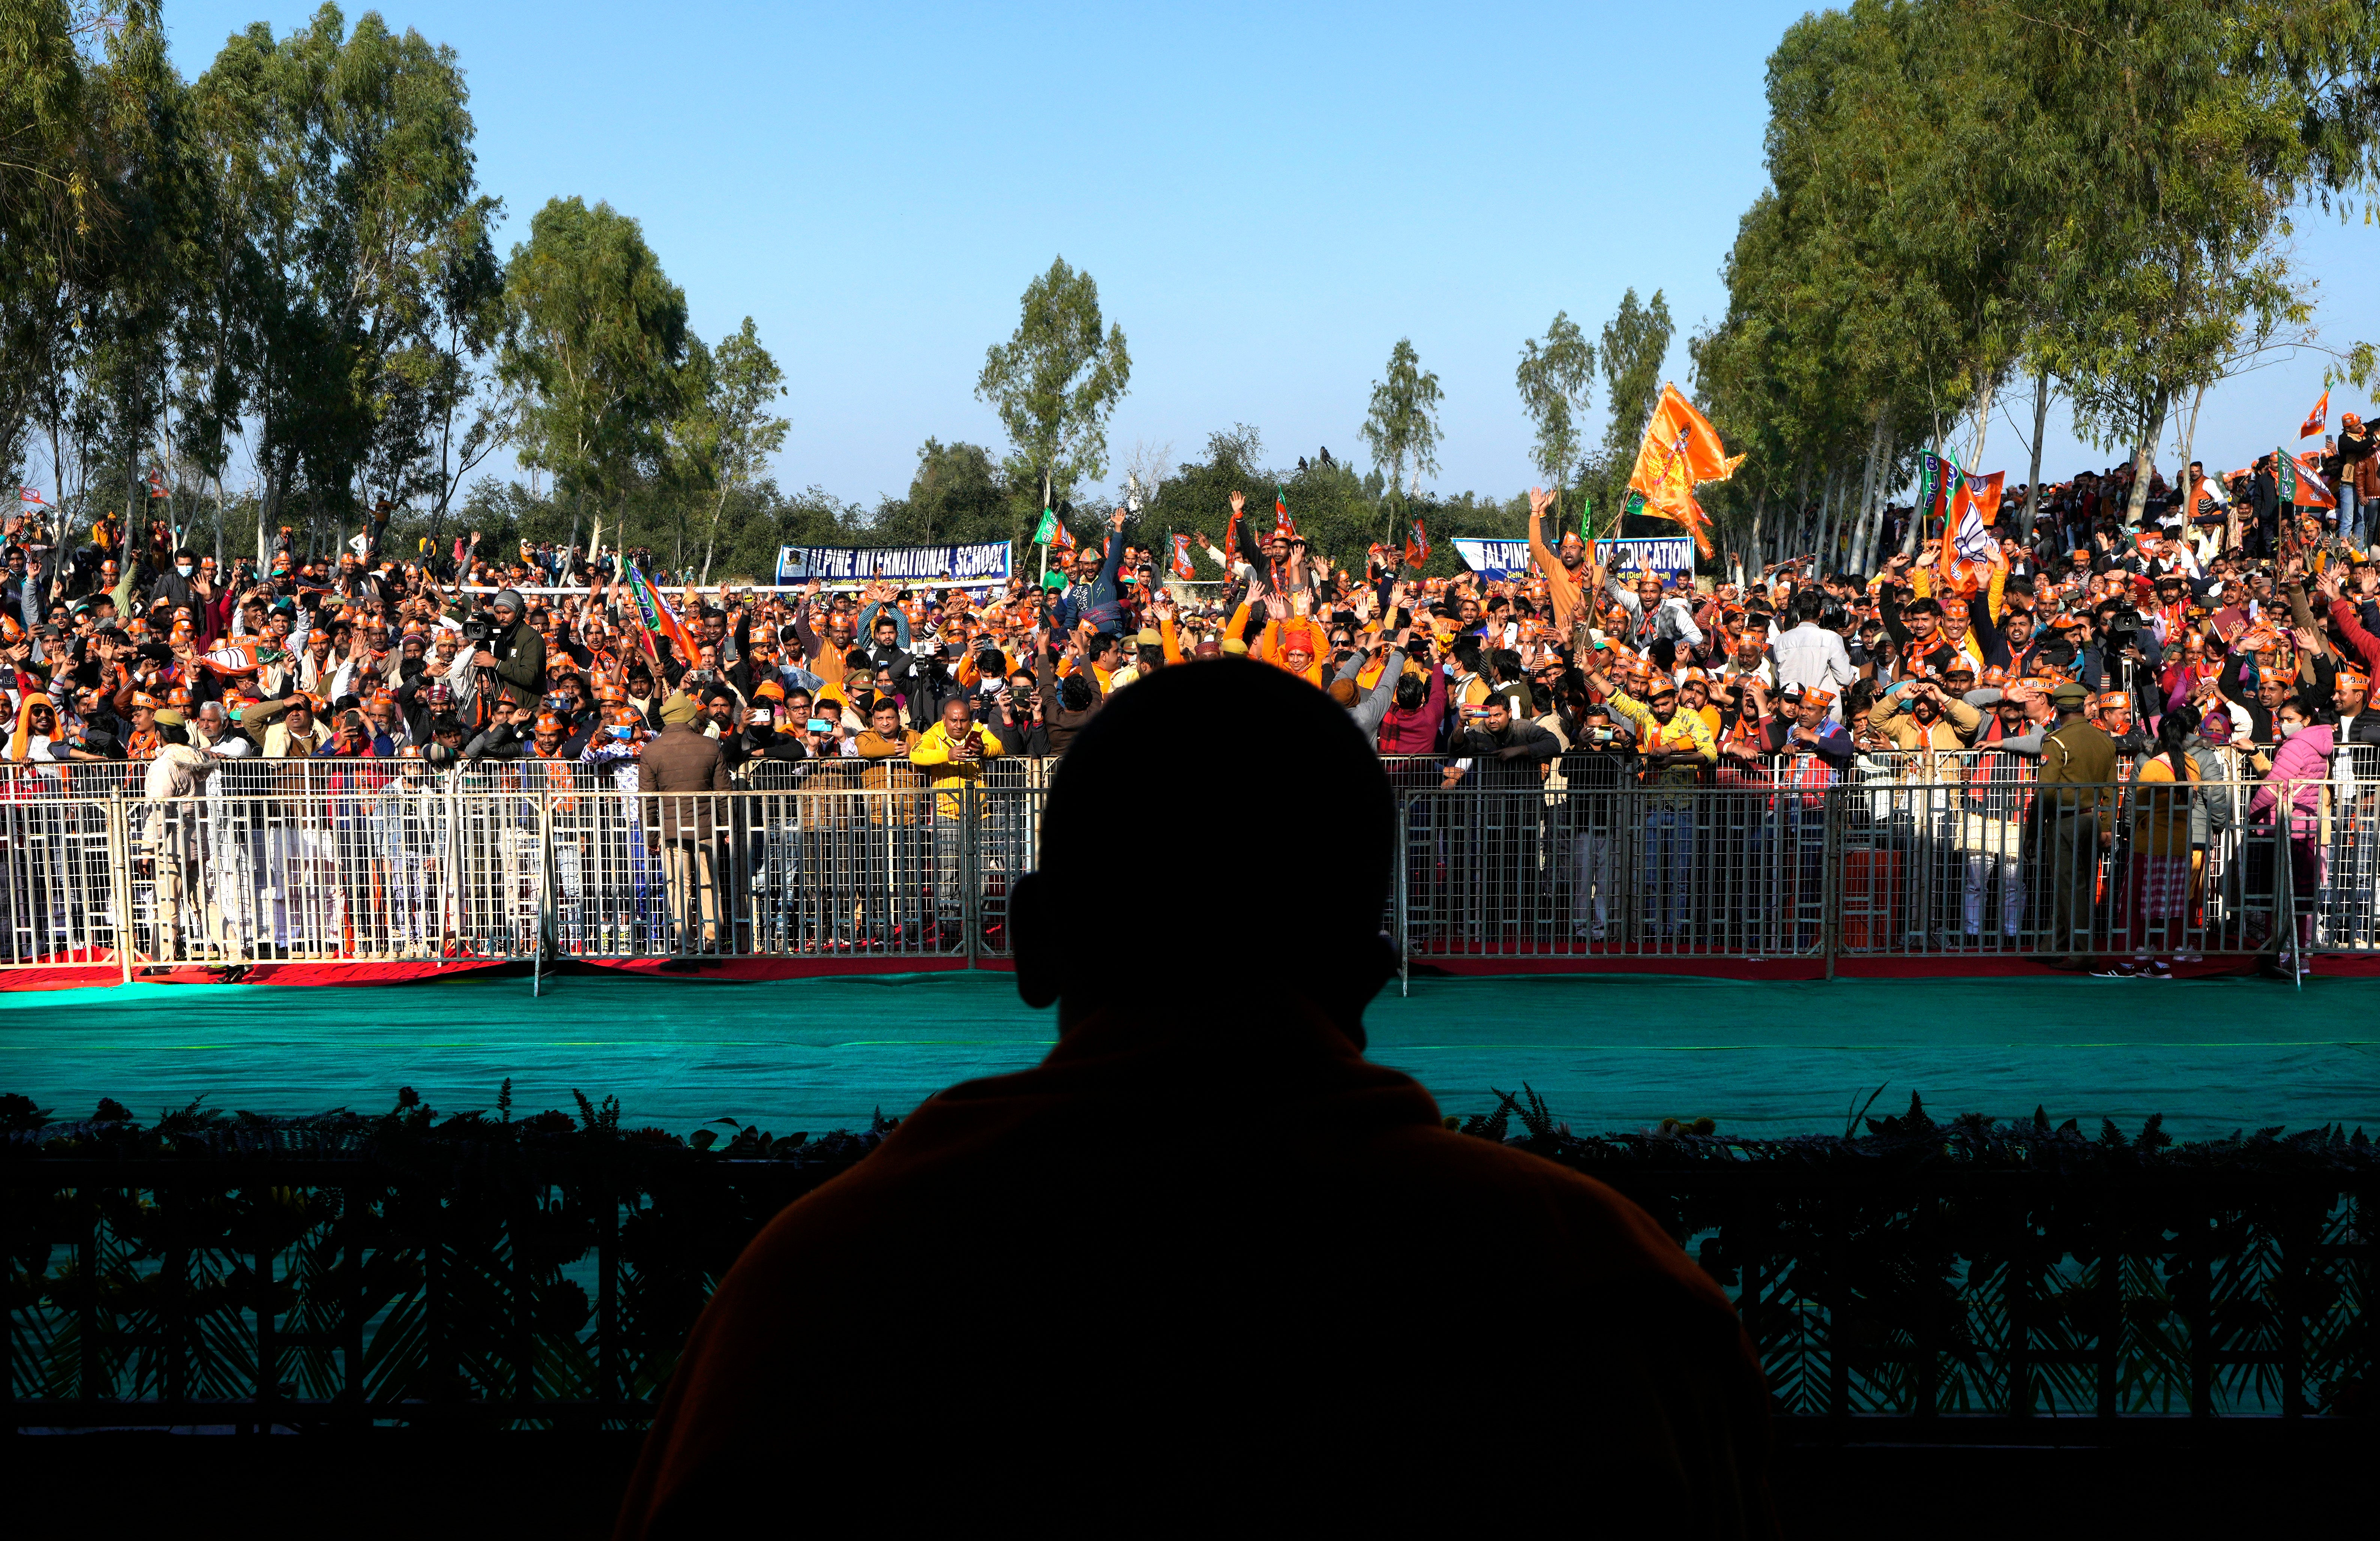 File: A silhouette of Yogi Adityanath, a polarising right-wing monk facing re-election in Uttar Pradesh, India’s most populous state